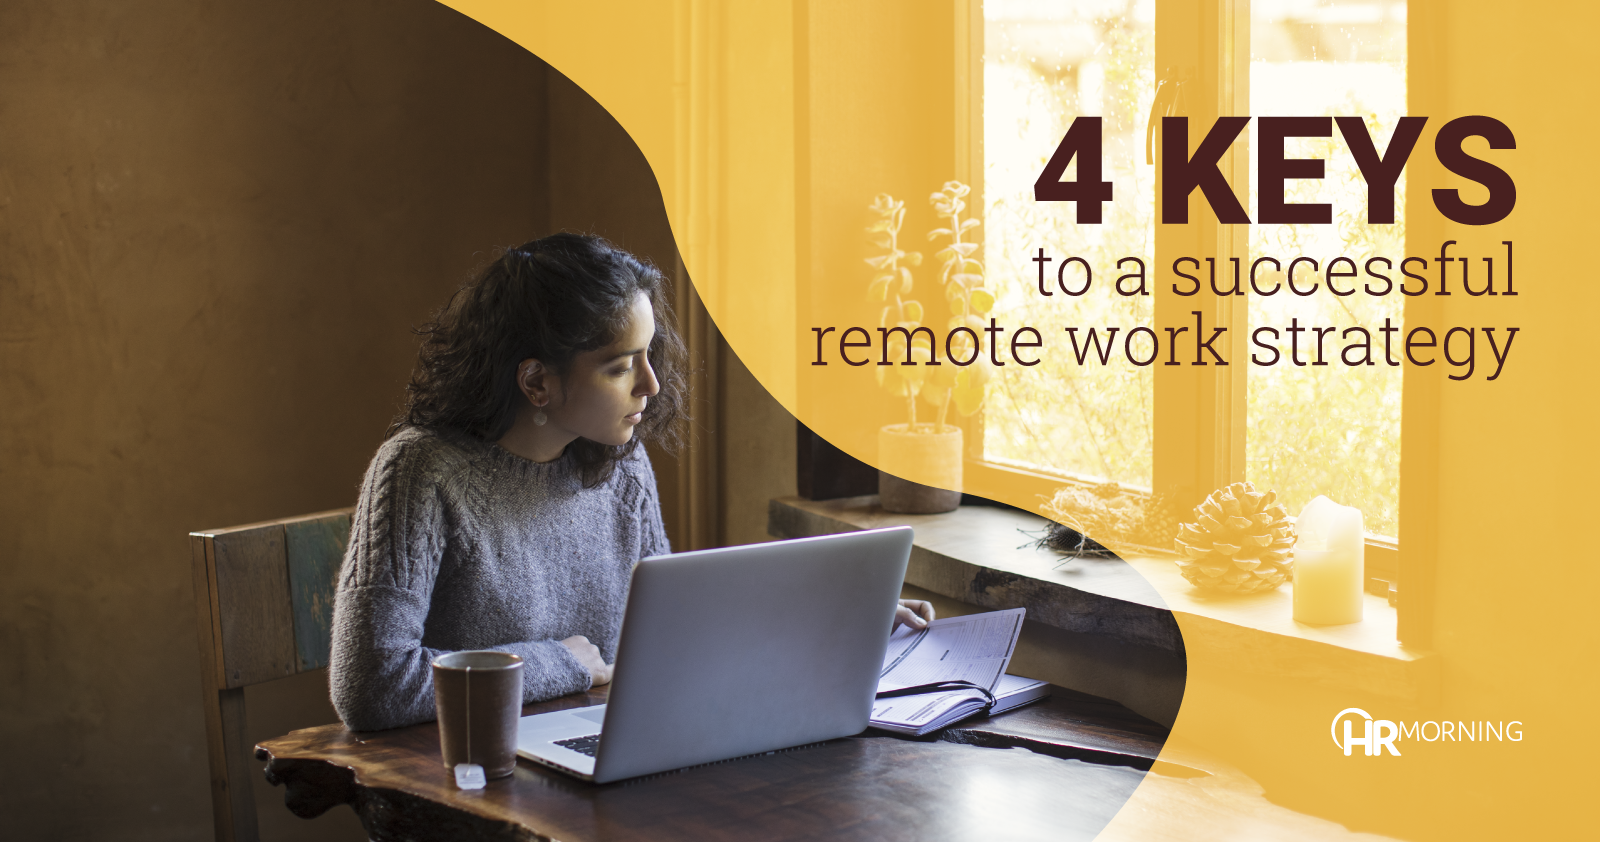 4 keys to a successful remote work strategy